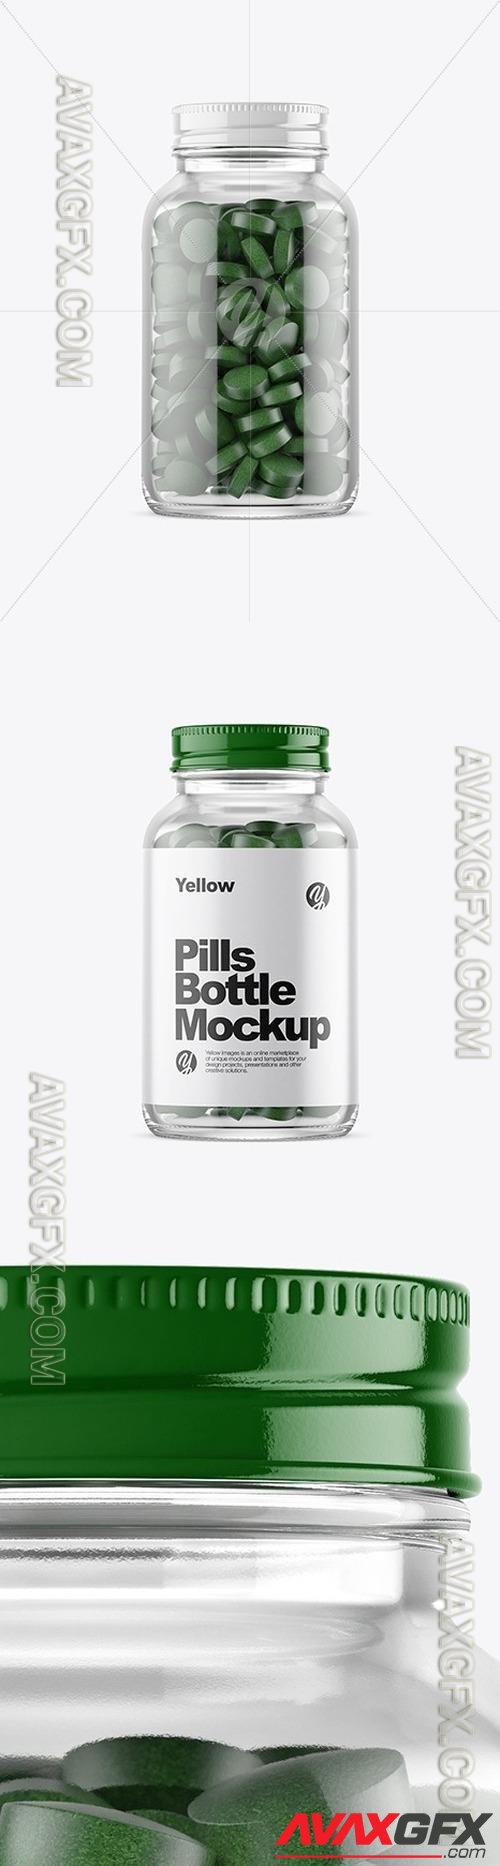 Clear Glass Bottle With Pills Mockup 51647 TIF